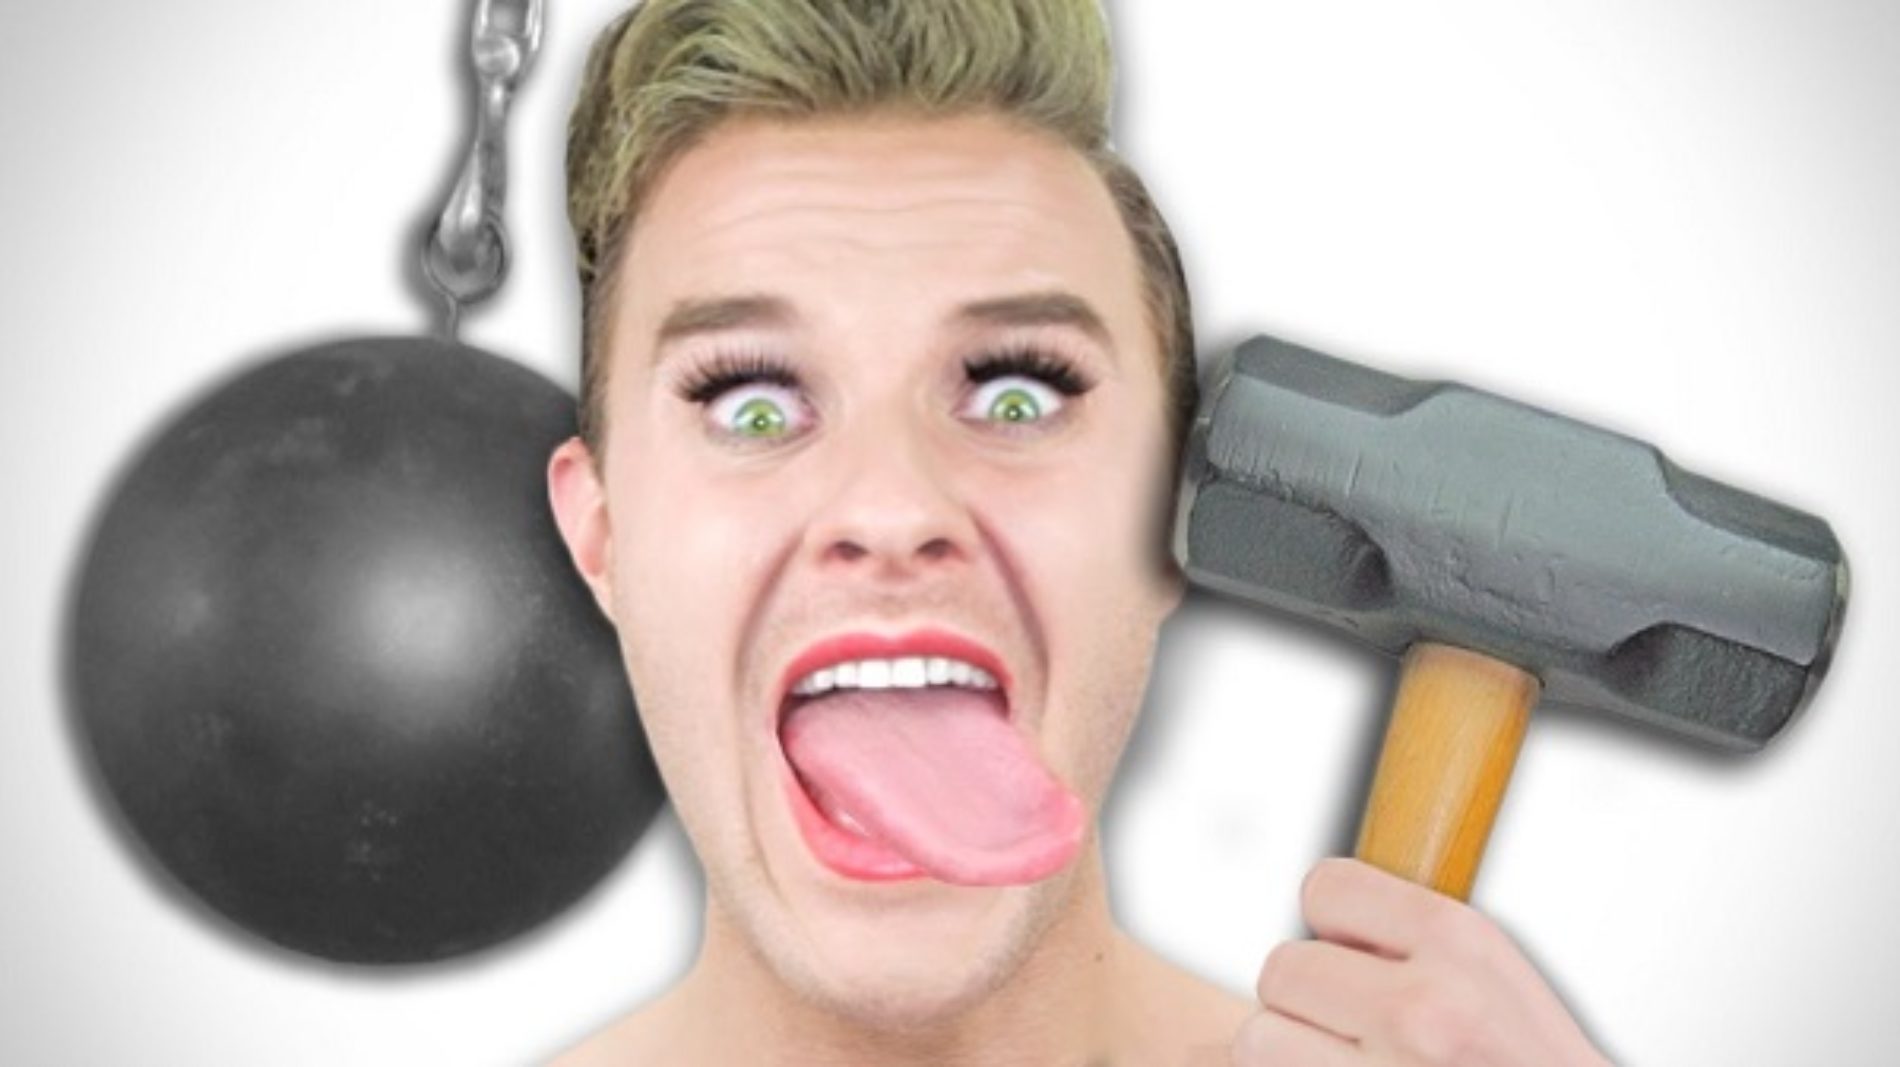 Video: Oh Look! It’s ‘Manny’ Cyrus!